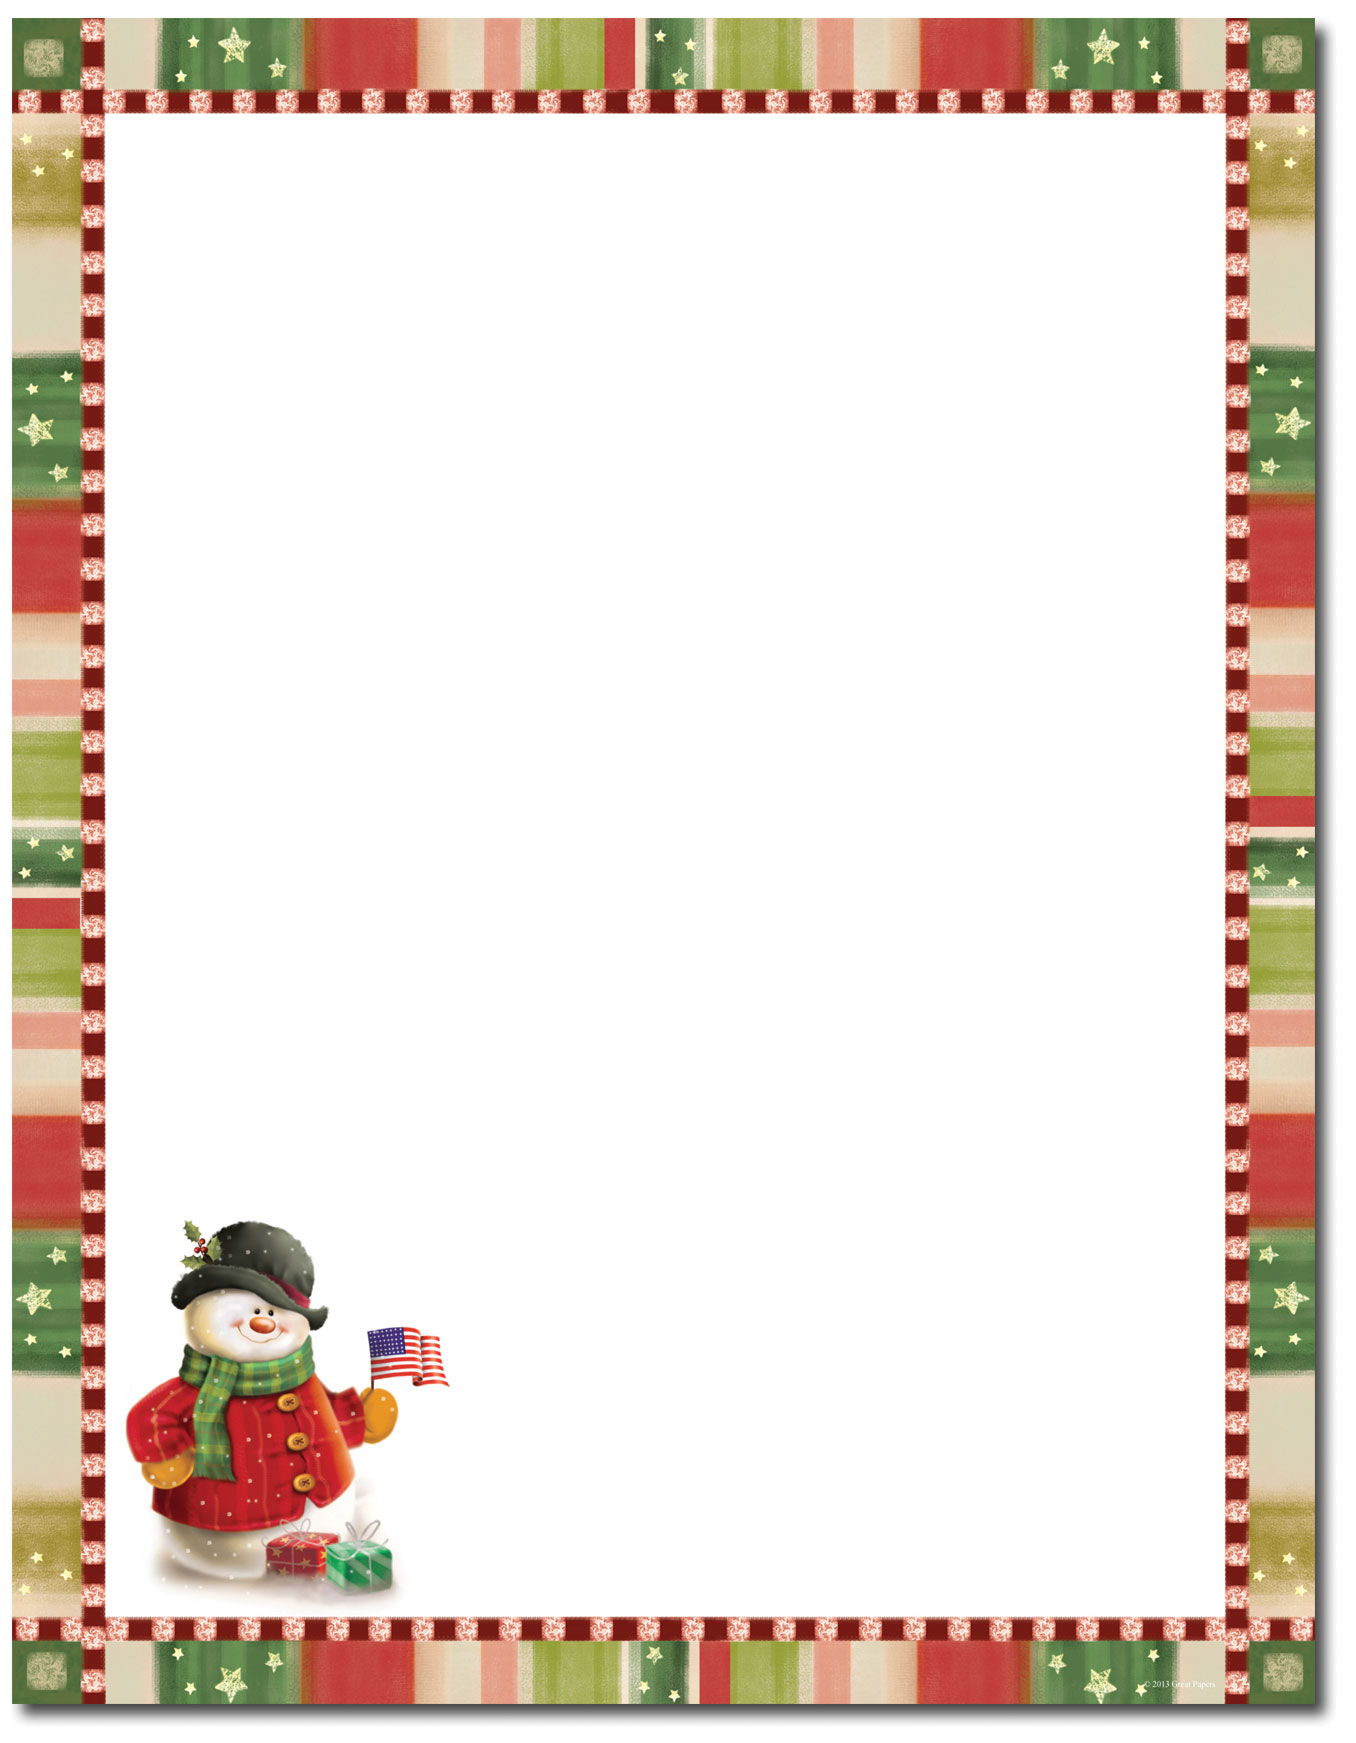 free-christmas-stationary-cliparts-download-free-christmas-stationary